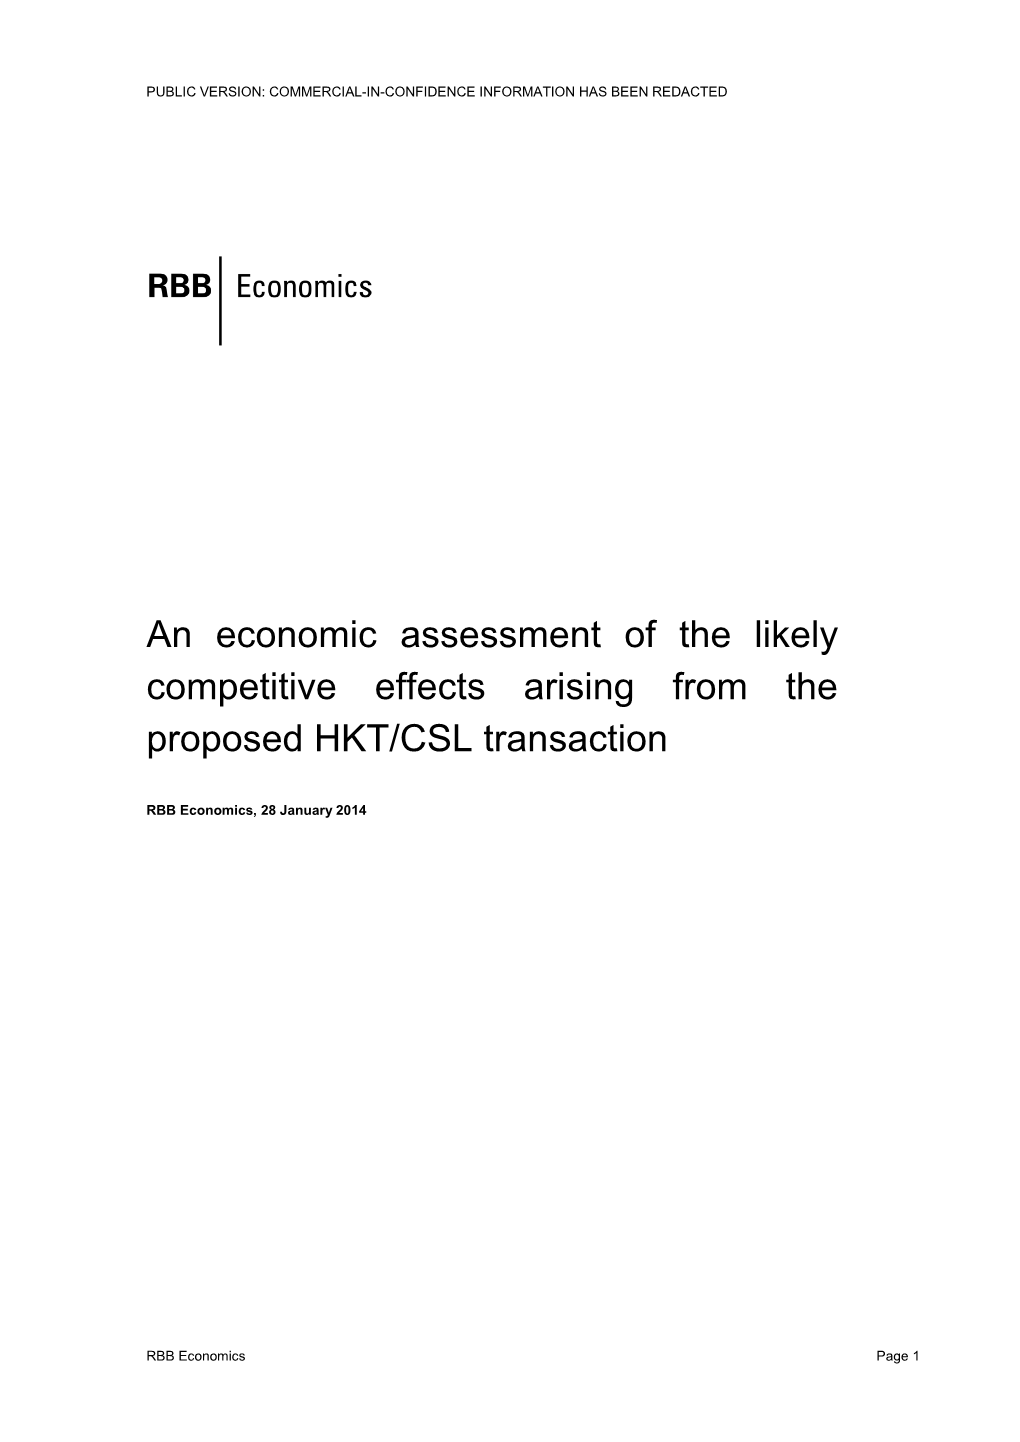 An Economic Assessment of the Likely Competitive Effects Arising from the Proposed HKT/CSL Transaction